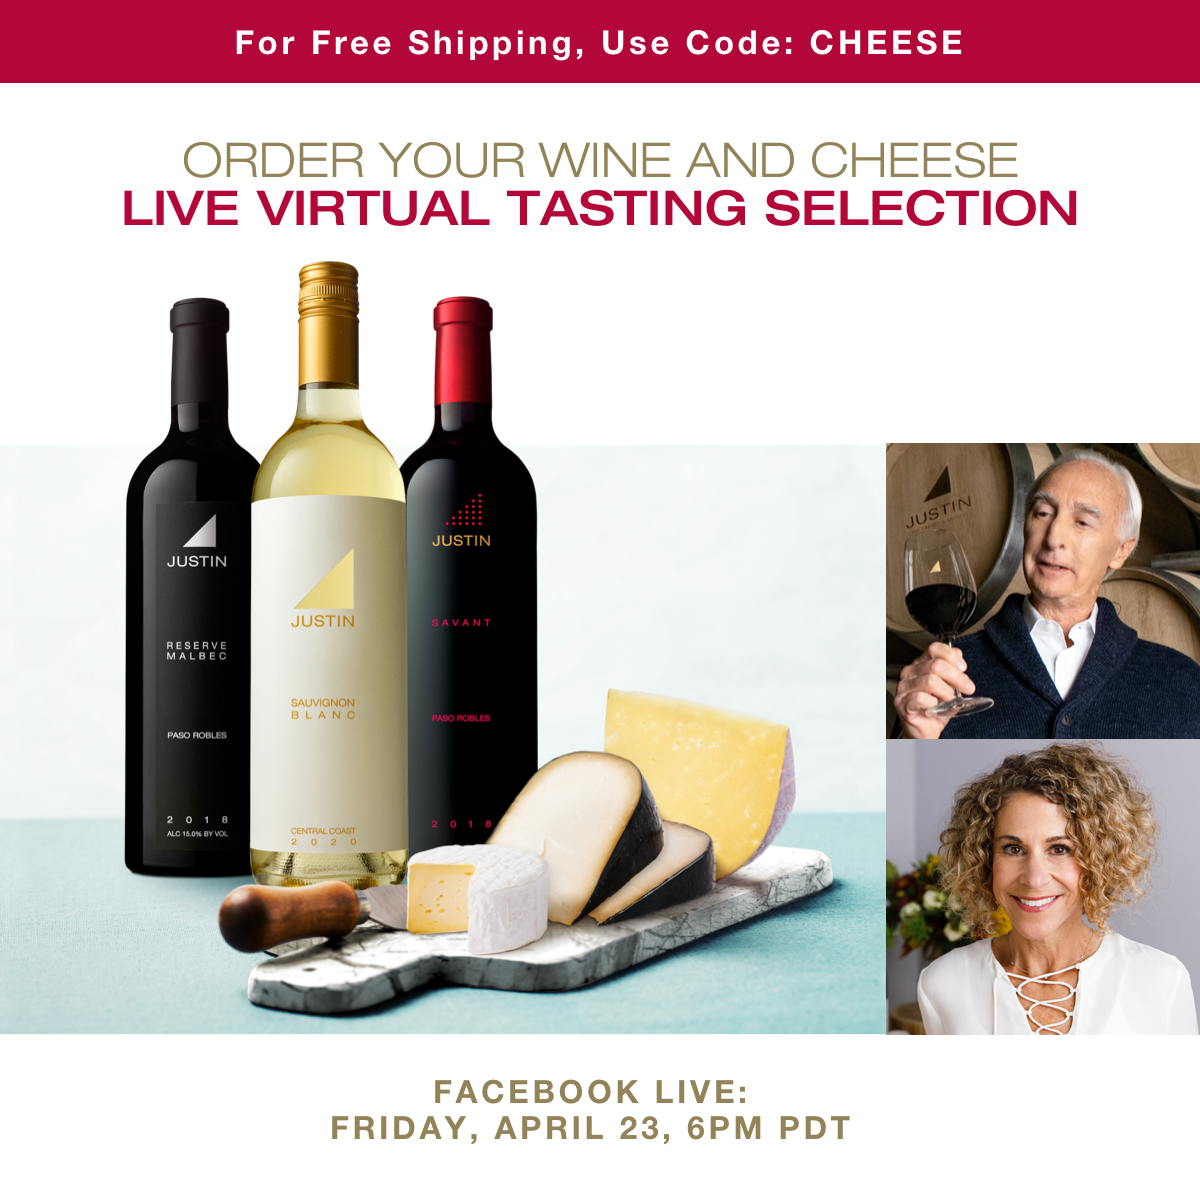 JUSTIN Wine and Cheese Tasting